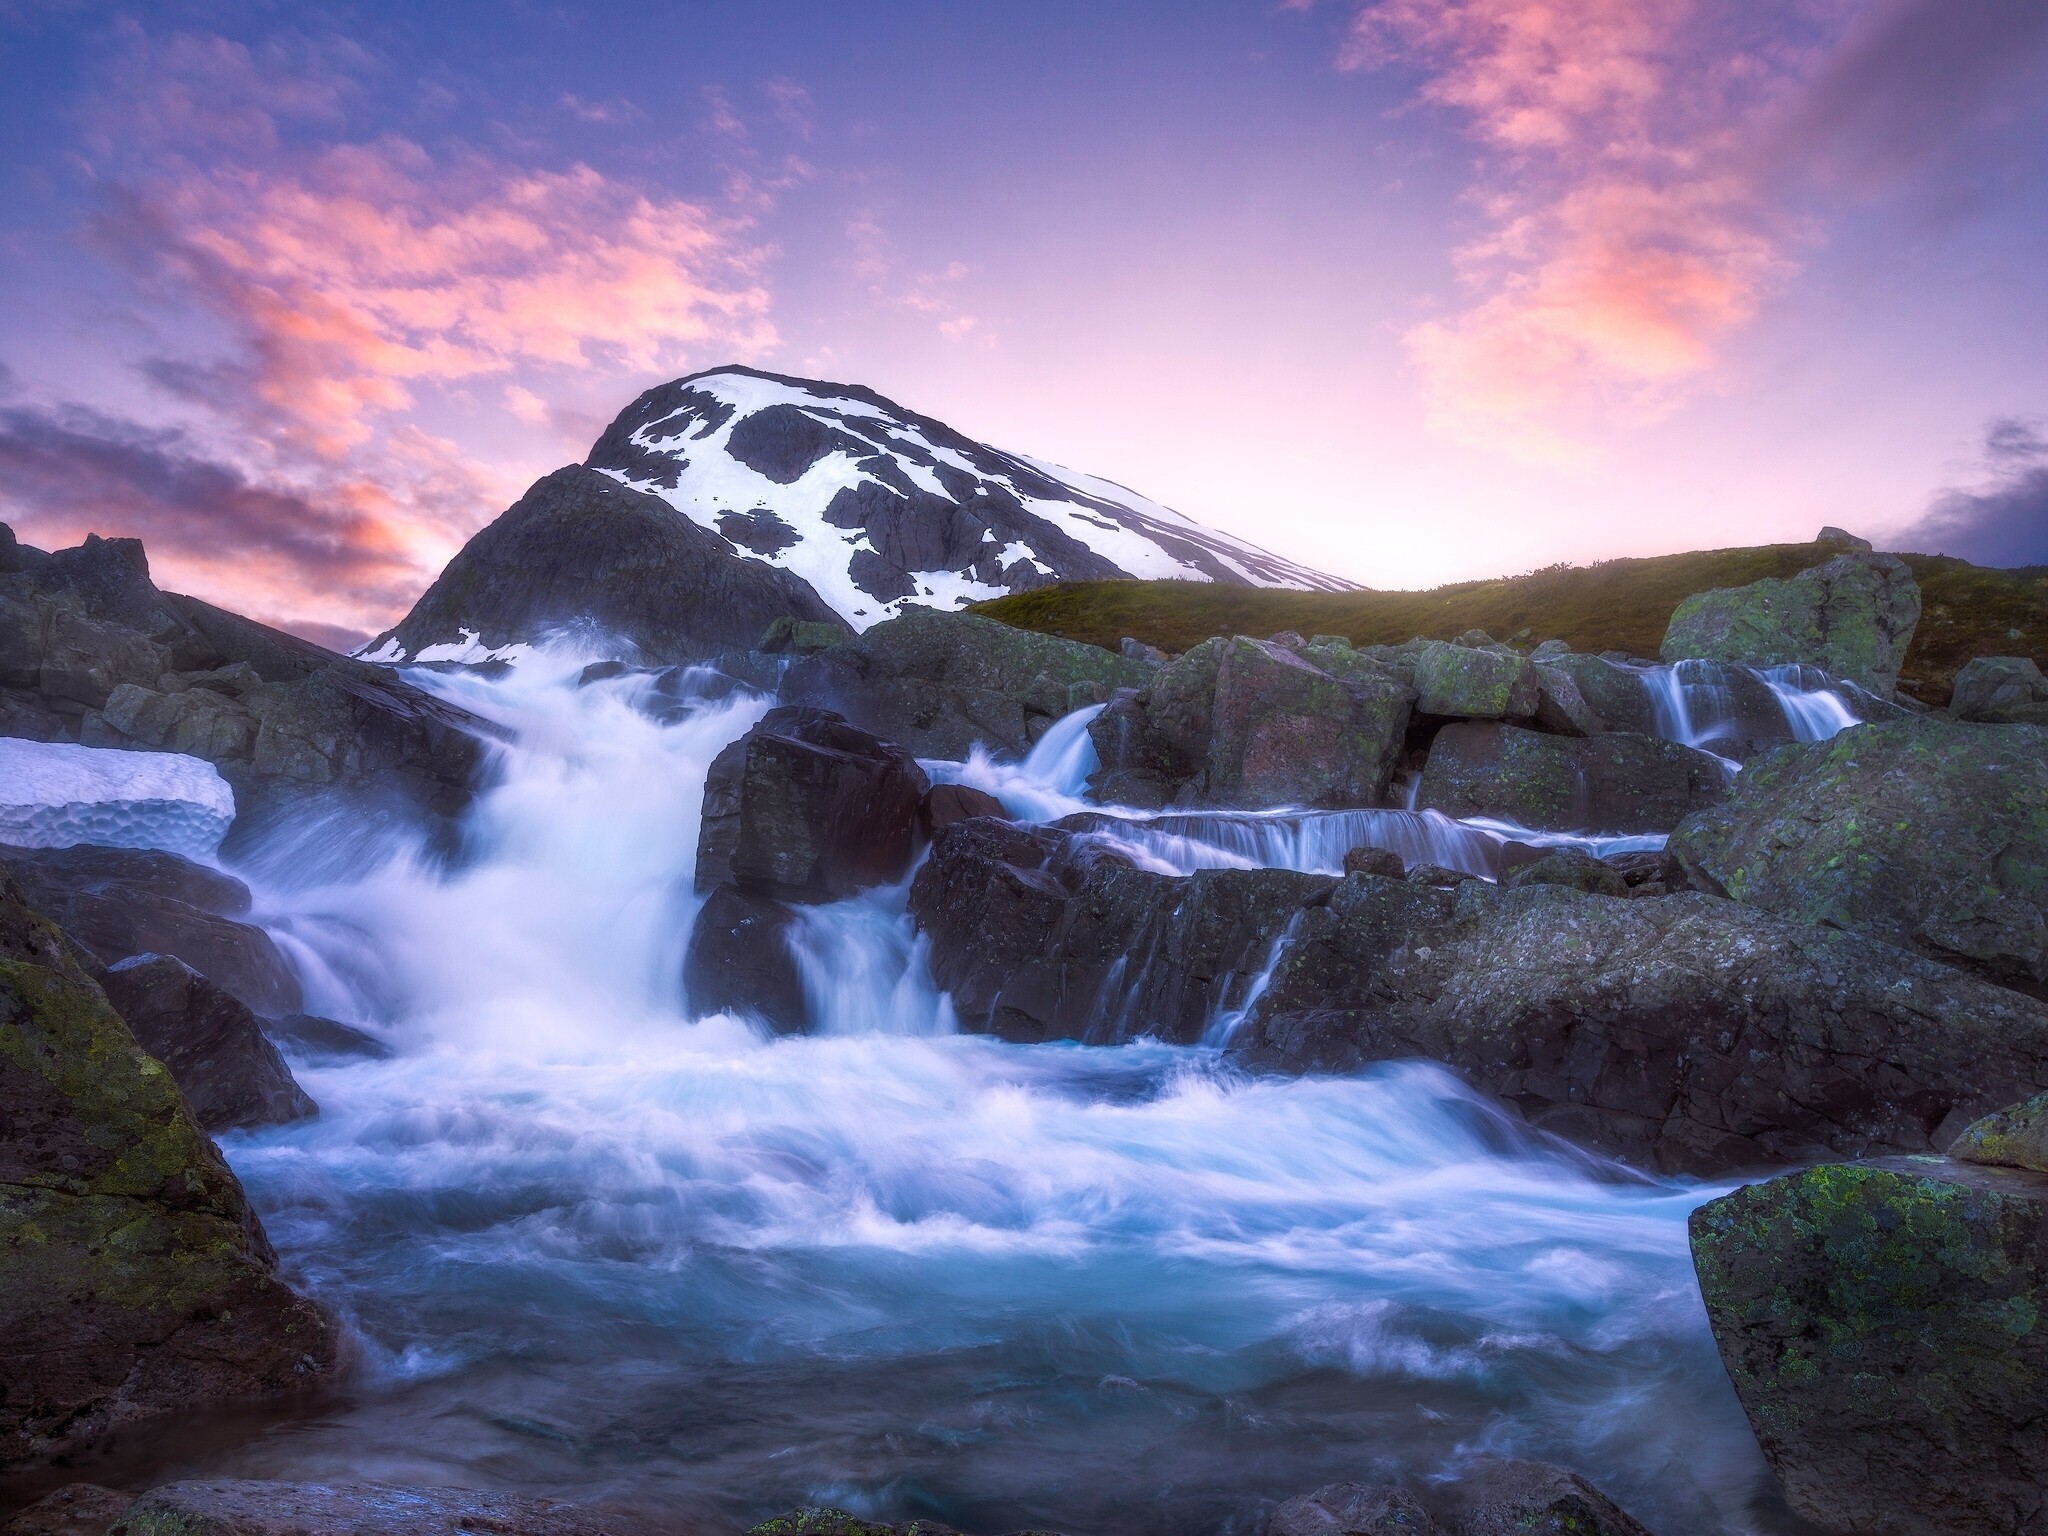 General 2048x1536 nature Norway water rocks outdoors landscape nordic landscapes